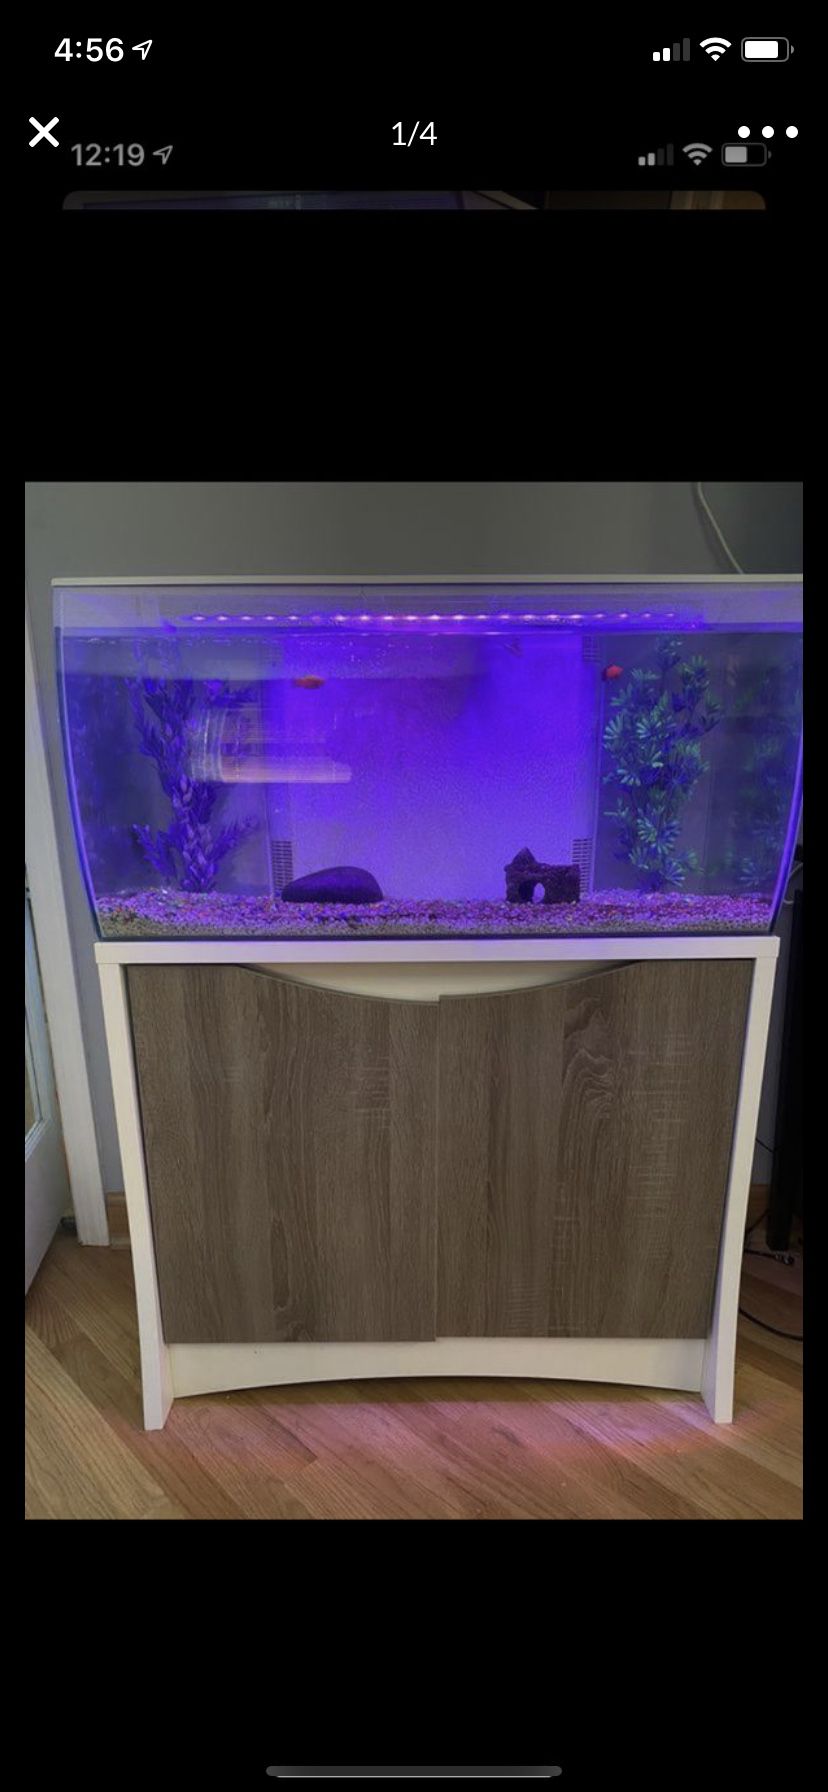 32.5 gallon tank with base. Plants, 4 fish and white rocks included